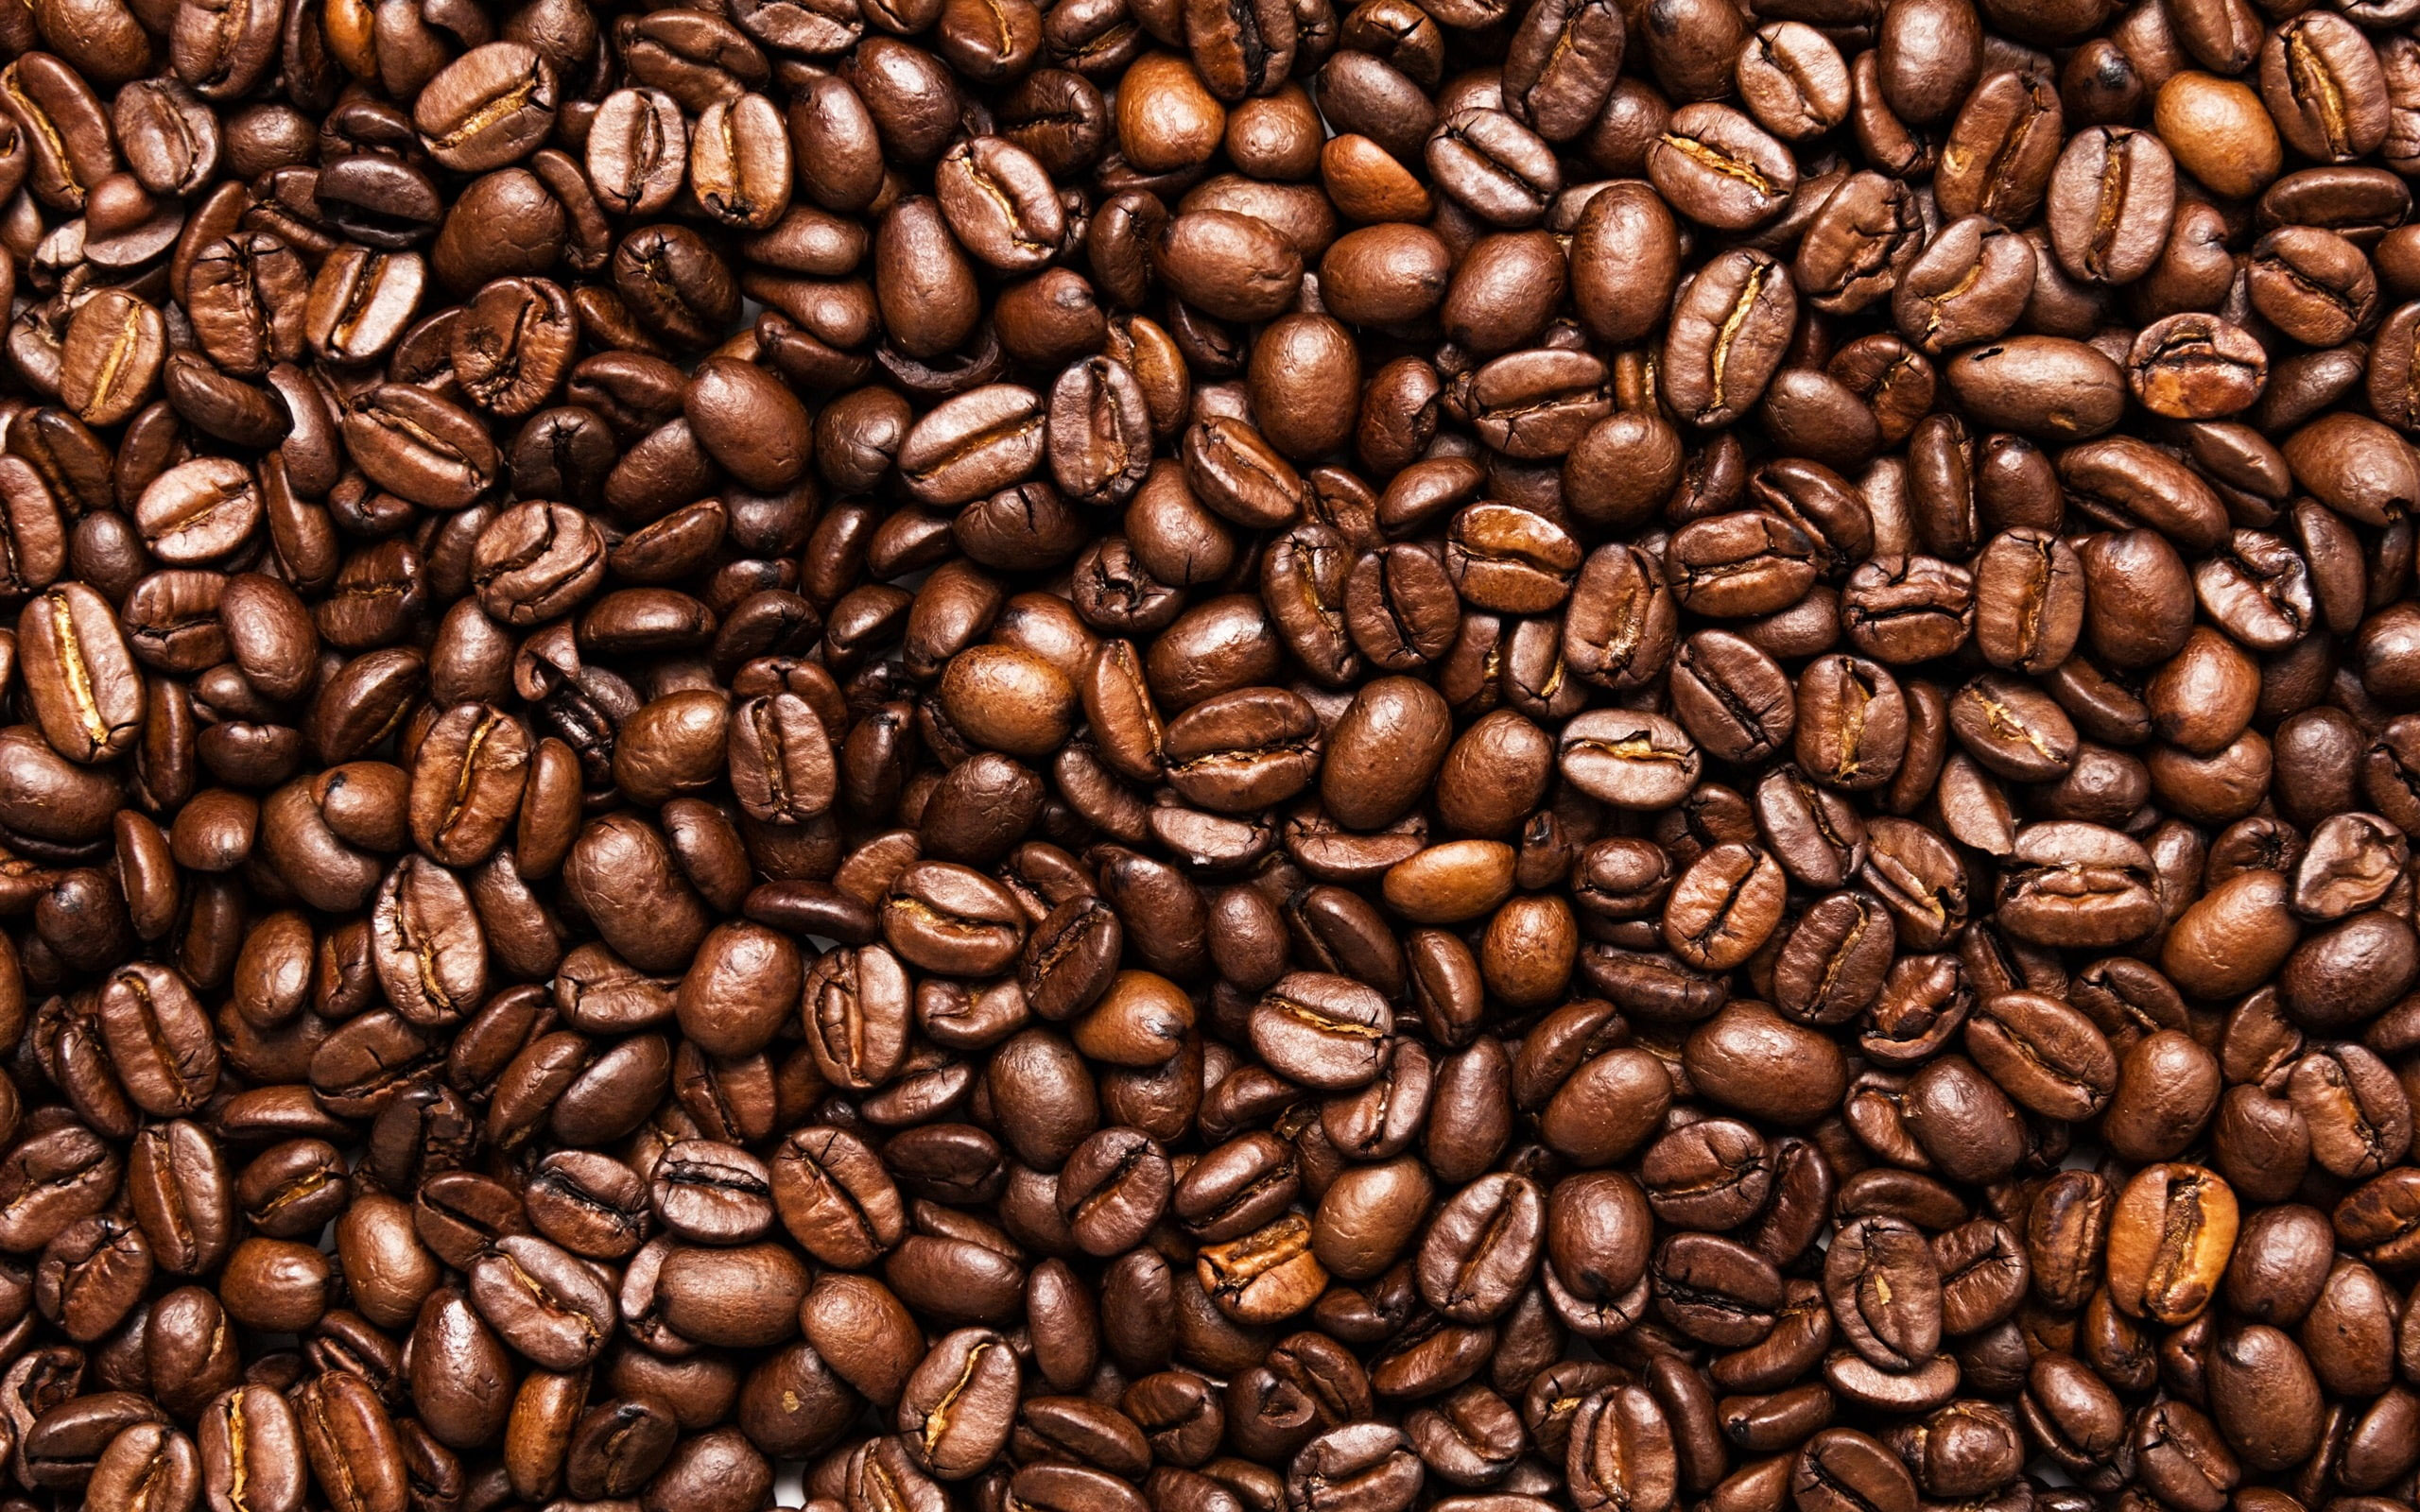 Toasted coffee beans wallpaper, seeds